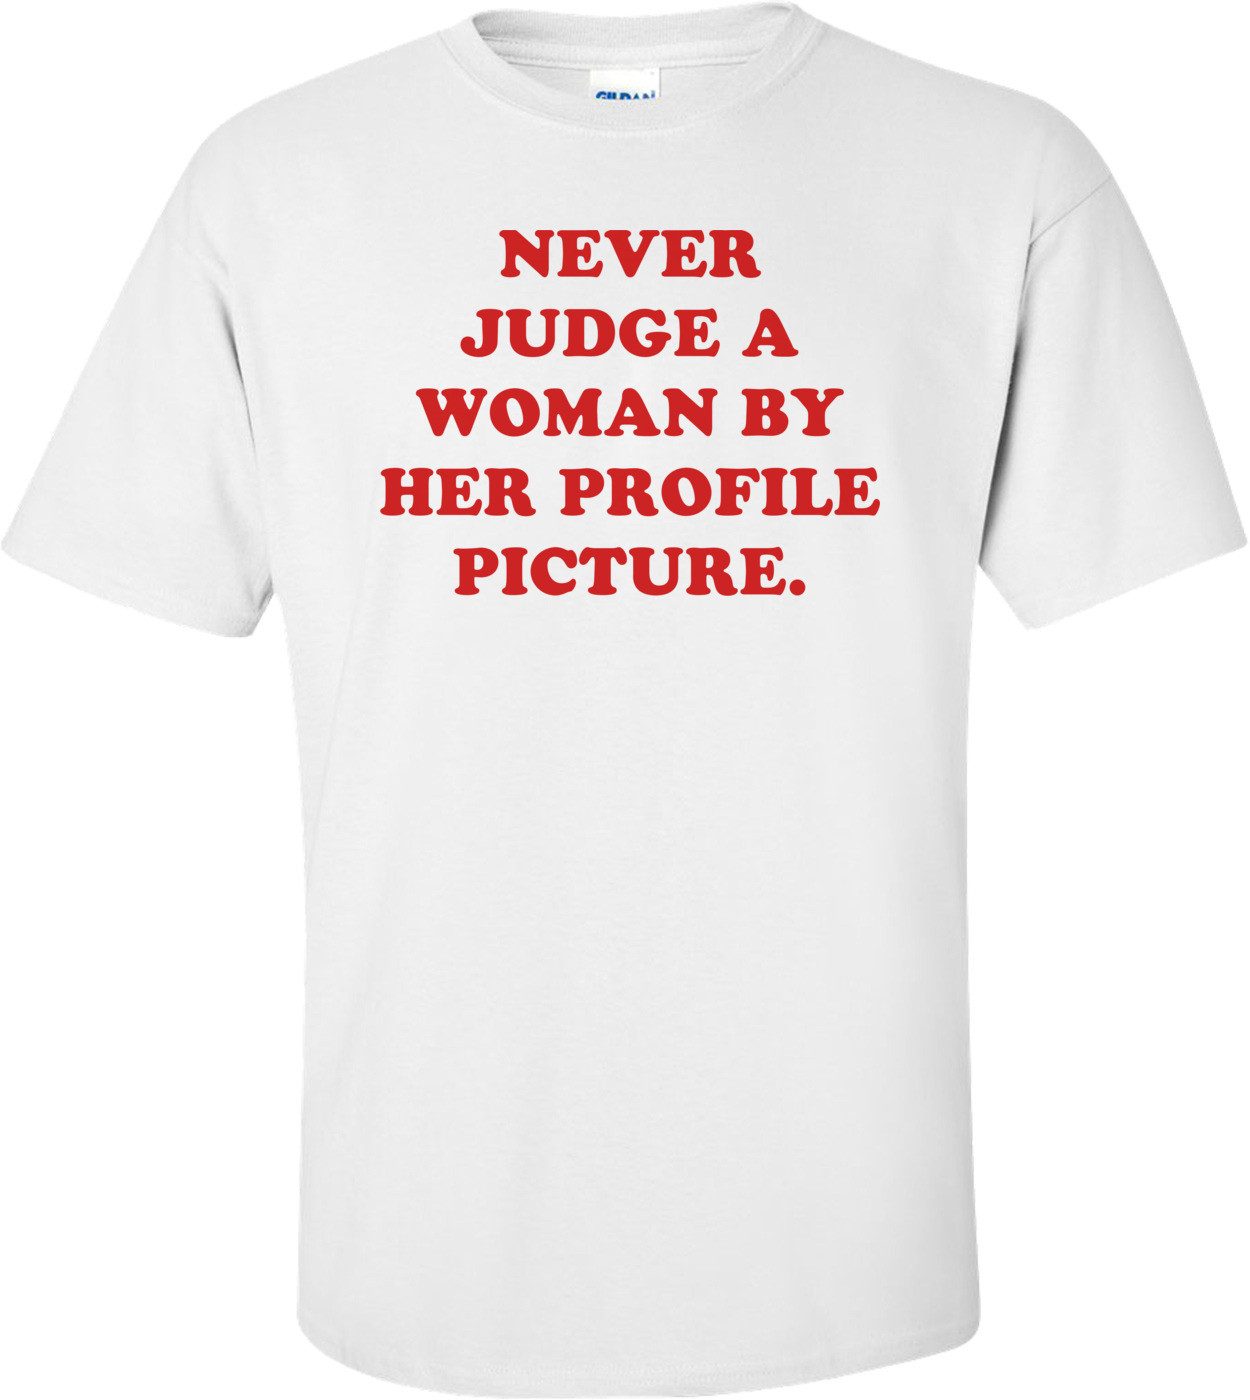 NEVER JUDGE A WOMAN BY HER PROFILE PICTURE. Shirt